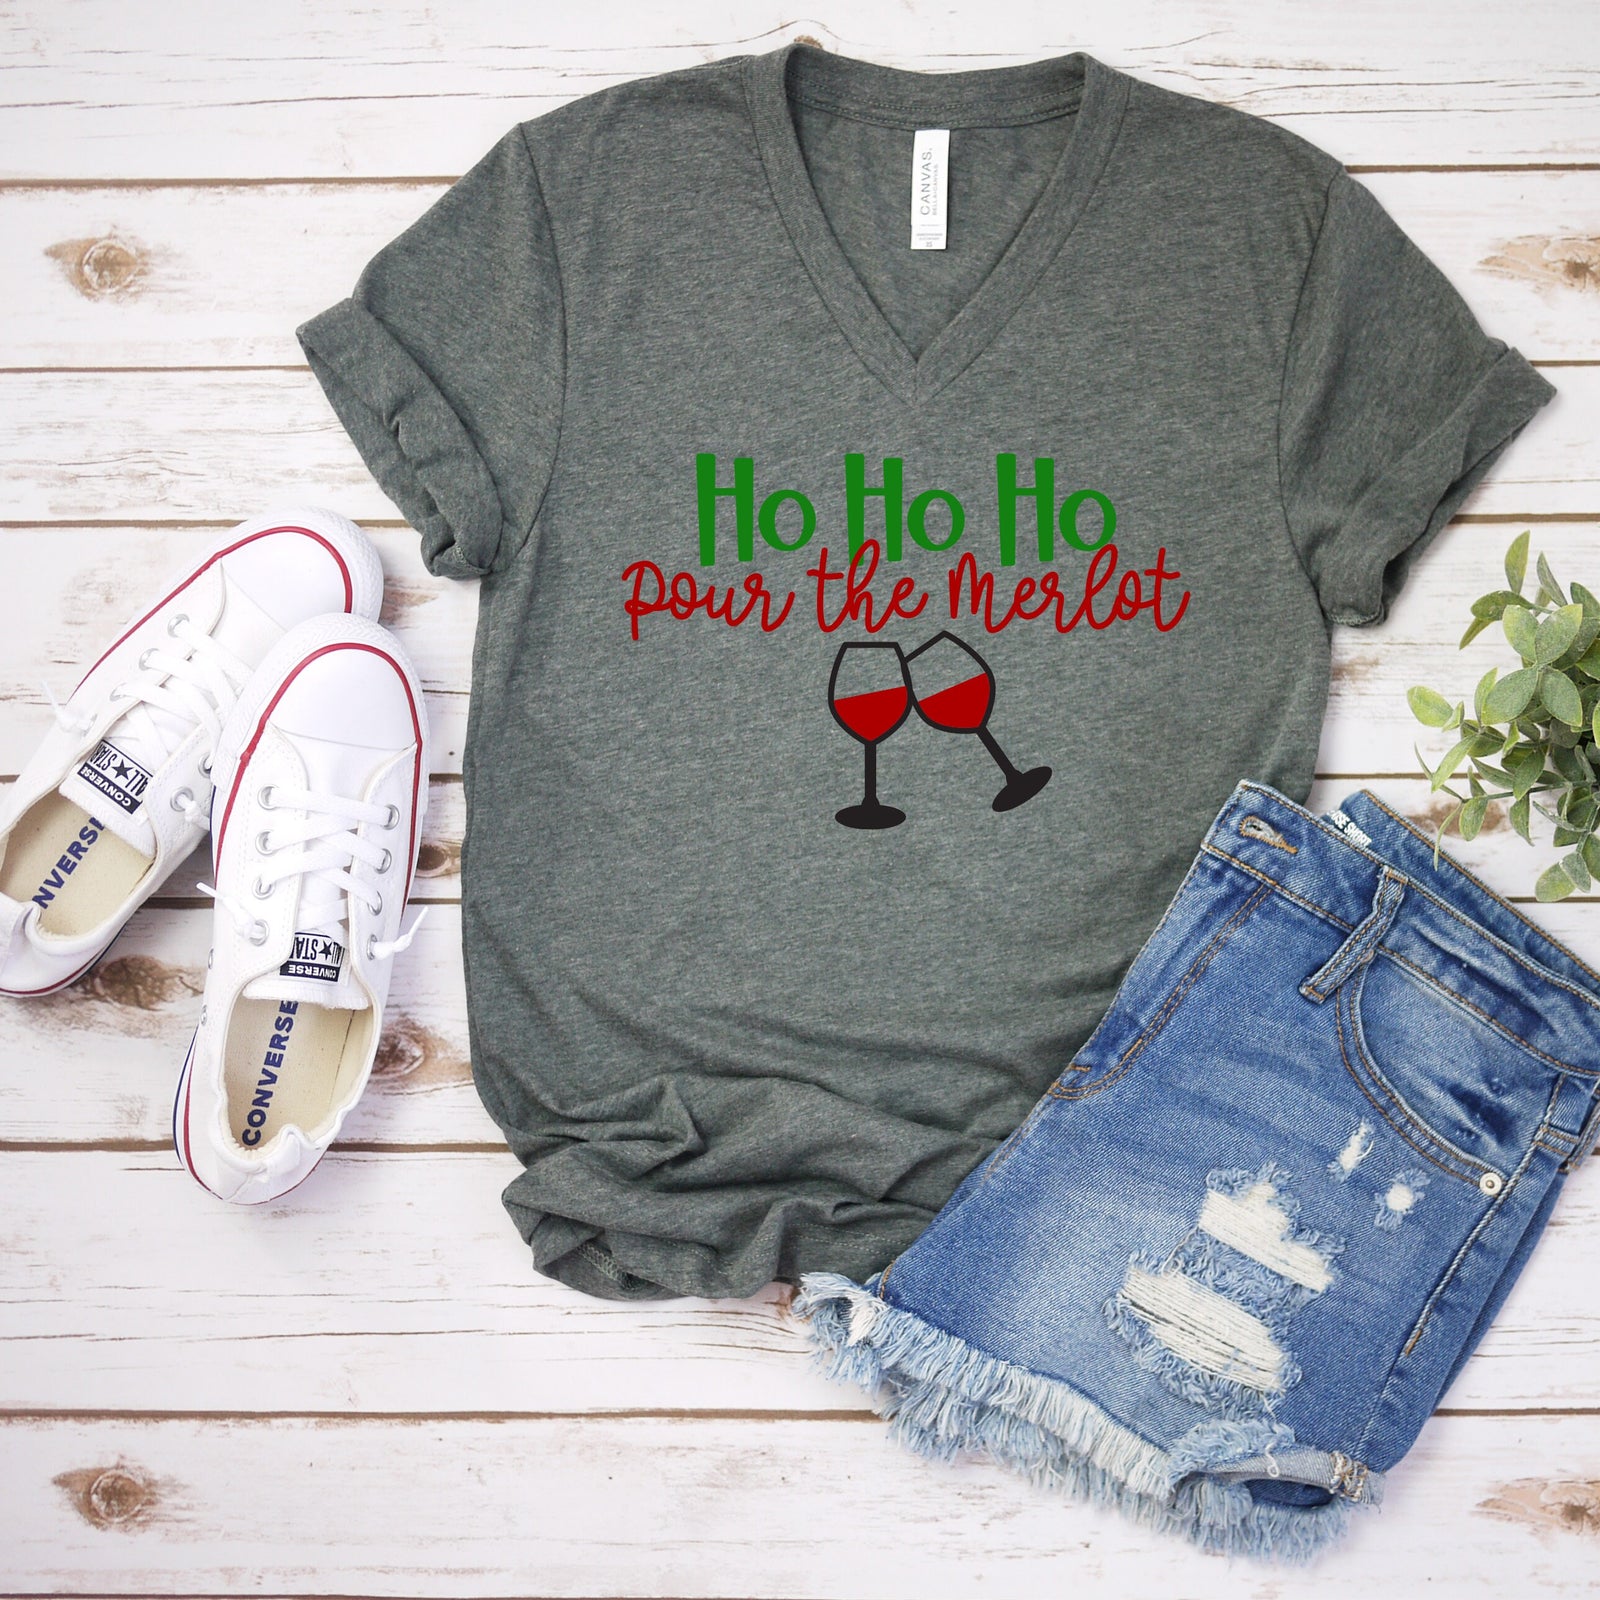 Ho Ho Ho Pour the Merlot Christmas T Shirt - Funny Wine Lover Gift Shirt- Christmas Party Couple Shirts - Wine Lover Holiday Shirt